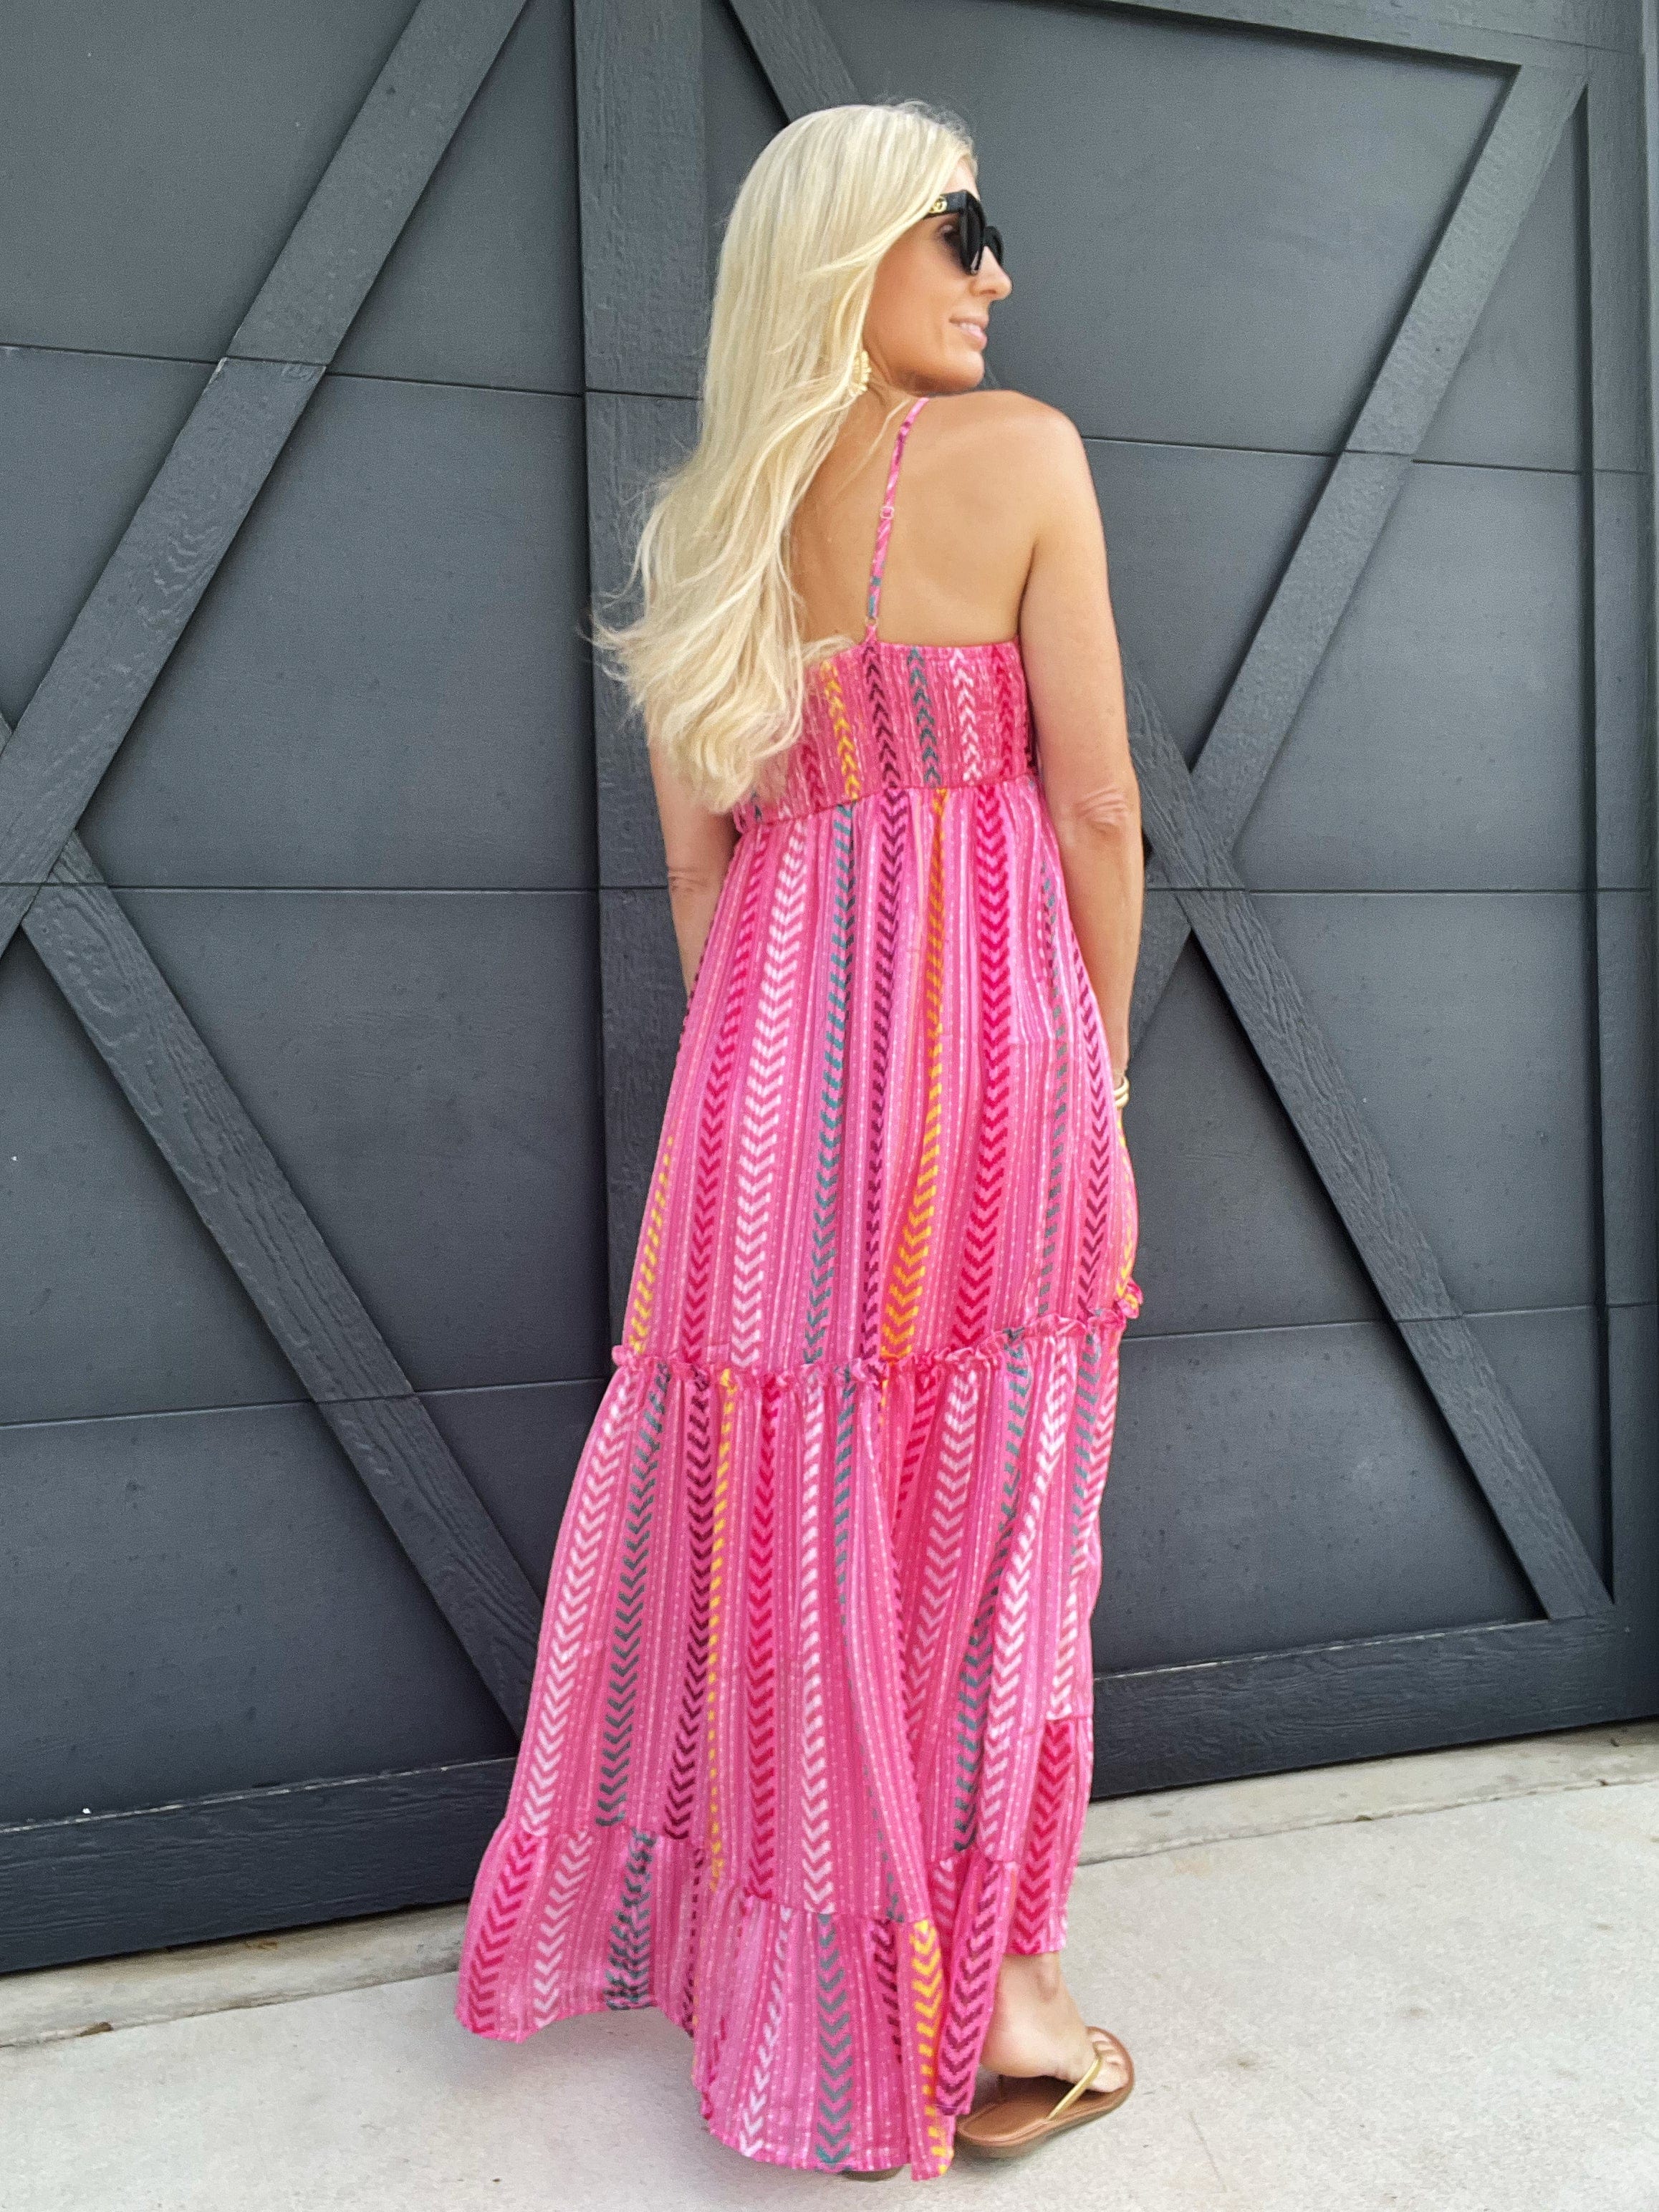 Aapparella Dresses The Vacay Maxi Dress In Pink